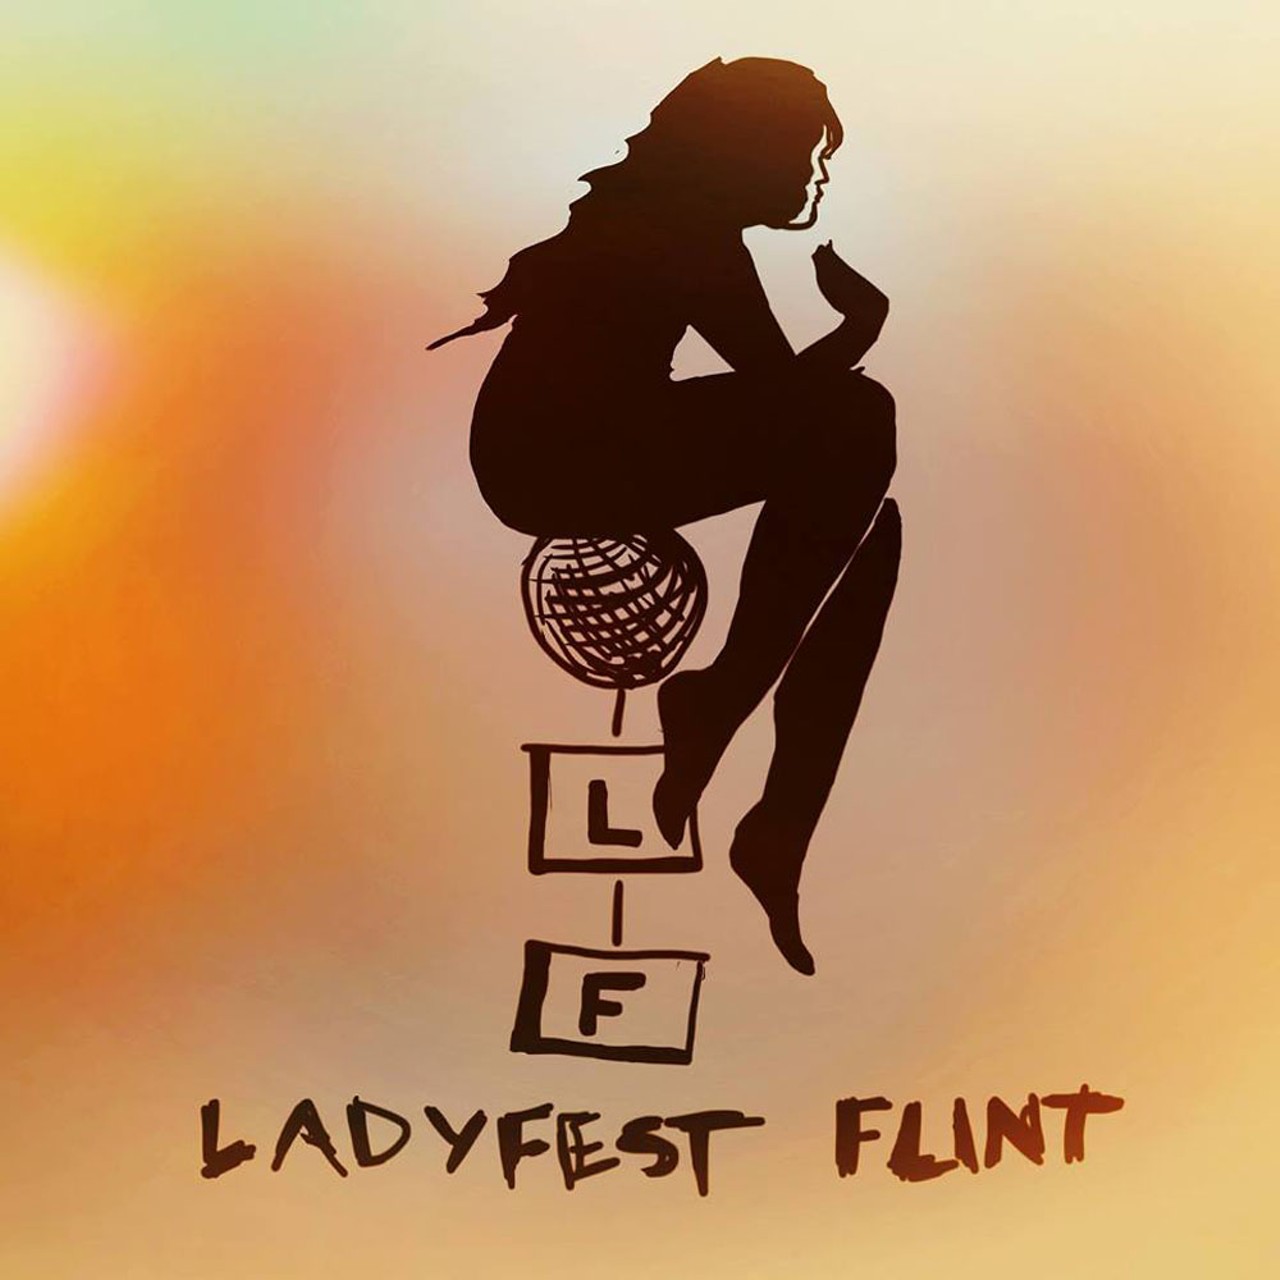 Friday, 9/16
LadyFest Flint	
@ Local 432
Ladies are being called to unite at the Local 432 to partake in celebrating the art, music, and productivity of women in society. Guests will have access to vendors, workshops, live music, and variety shows. Local artist Alexis Jones of iCultured Apparel designed a super cool logo for the fest, which is available for purchase on limited edition stickers and T-shirts. Come out and support the ladies, while enjoying a bit of local arts and culture, without breaking the bank.
Runs Friday from 7:30 p.m. to 11 p.m. and Saturday from 4 a.m. to 10 p.m. ; 124 W. First St., Flint; flintlocal432.com; admission is free.